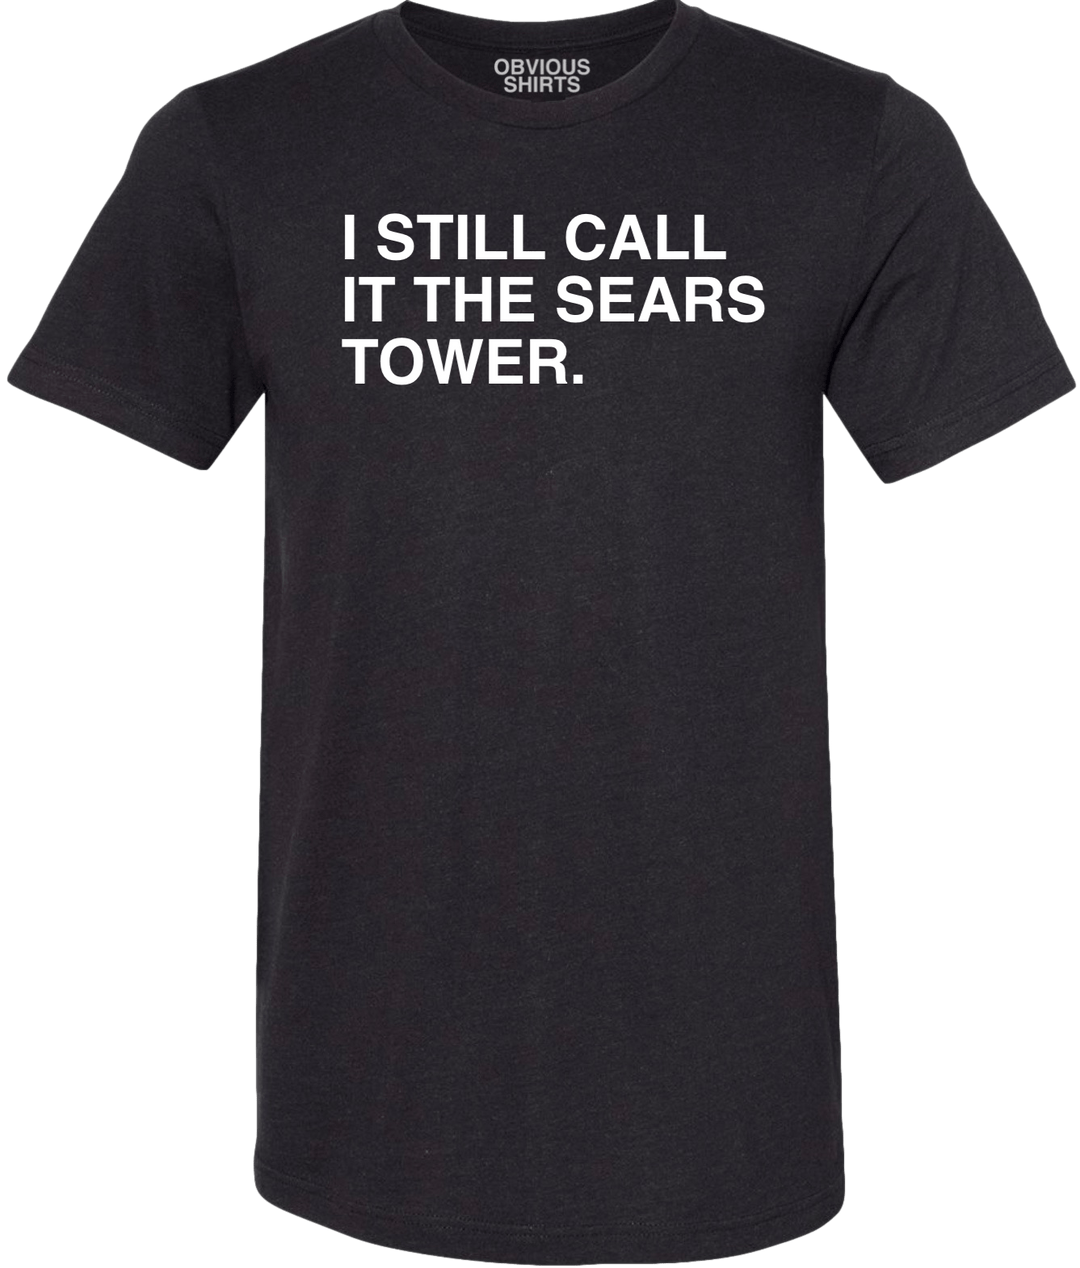 I STILL CALL IT THE SEARS TOWER. - OBVIOUS SHIRTS